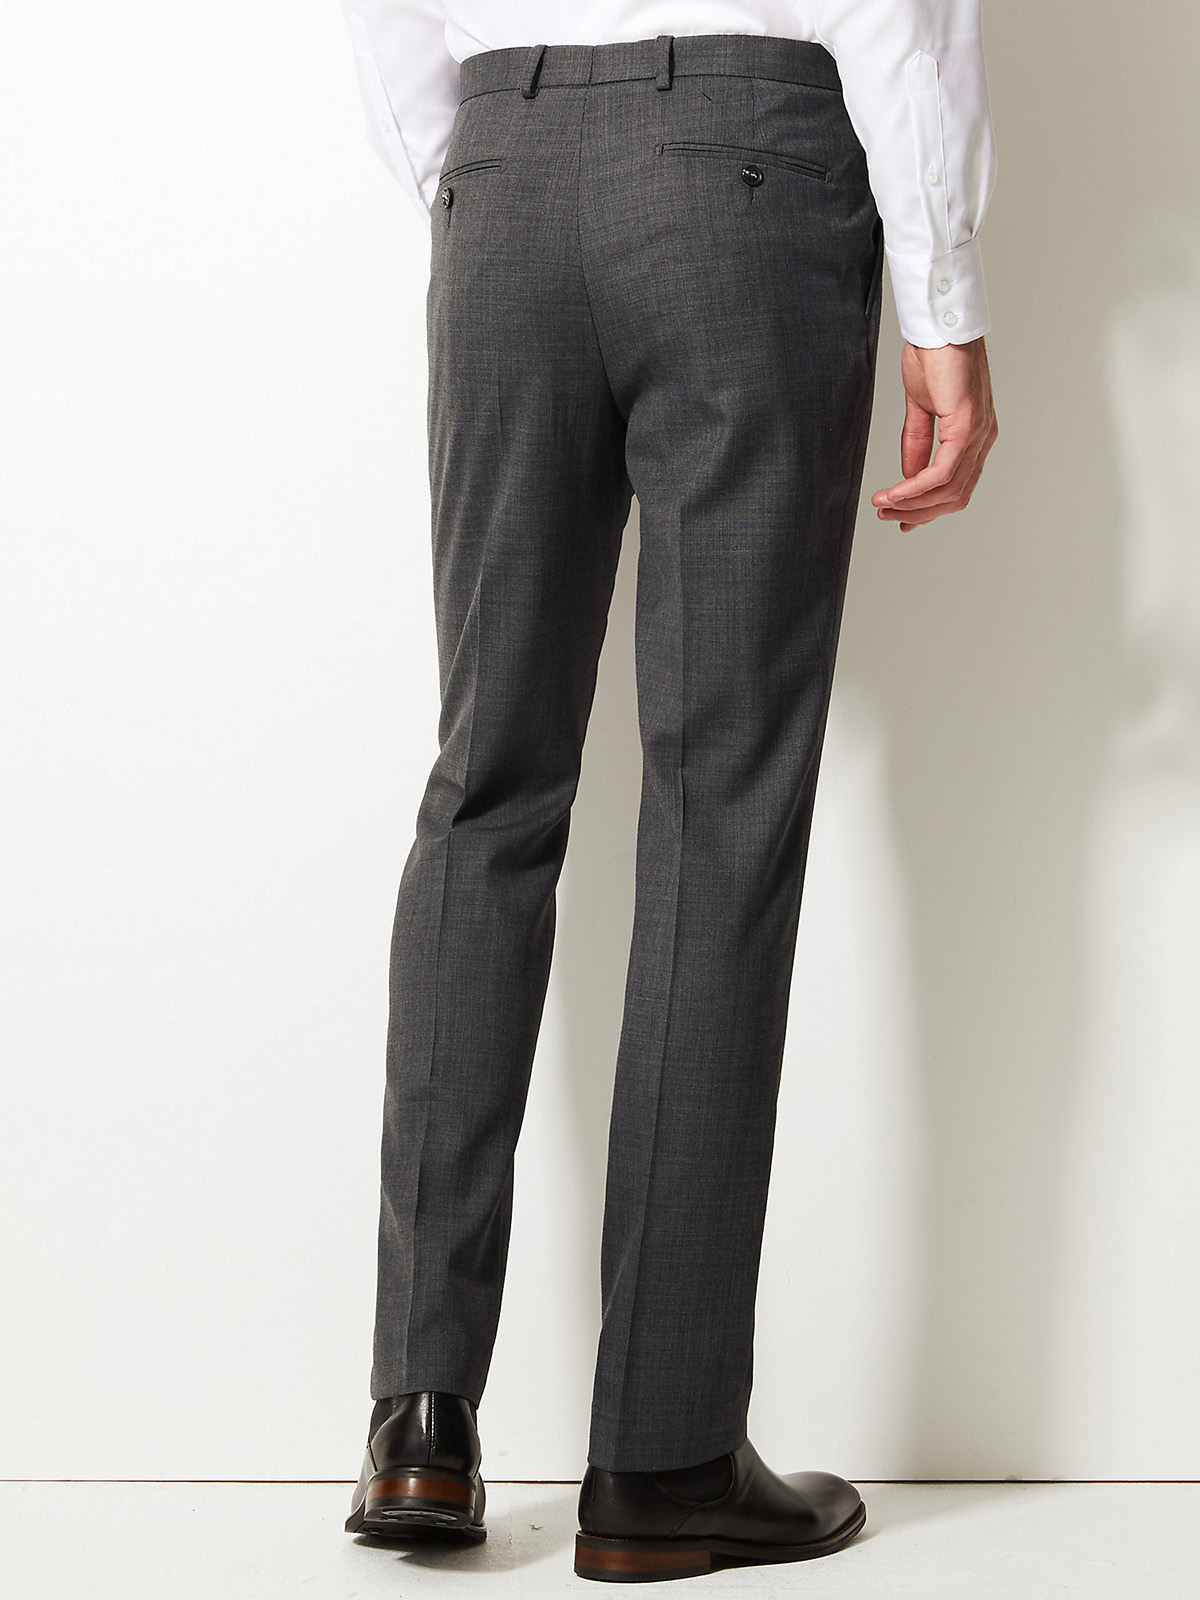 Marks and Spencer - - M&5 GREY Mens Tailored Wool Blend Single Pleat ...